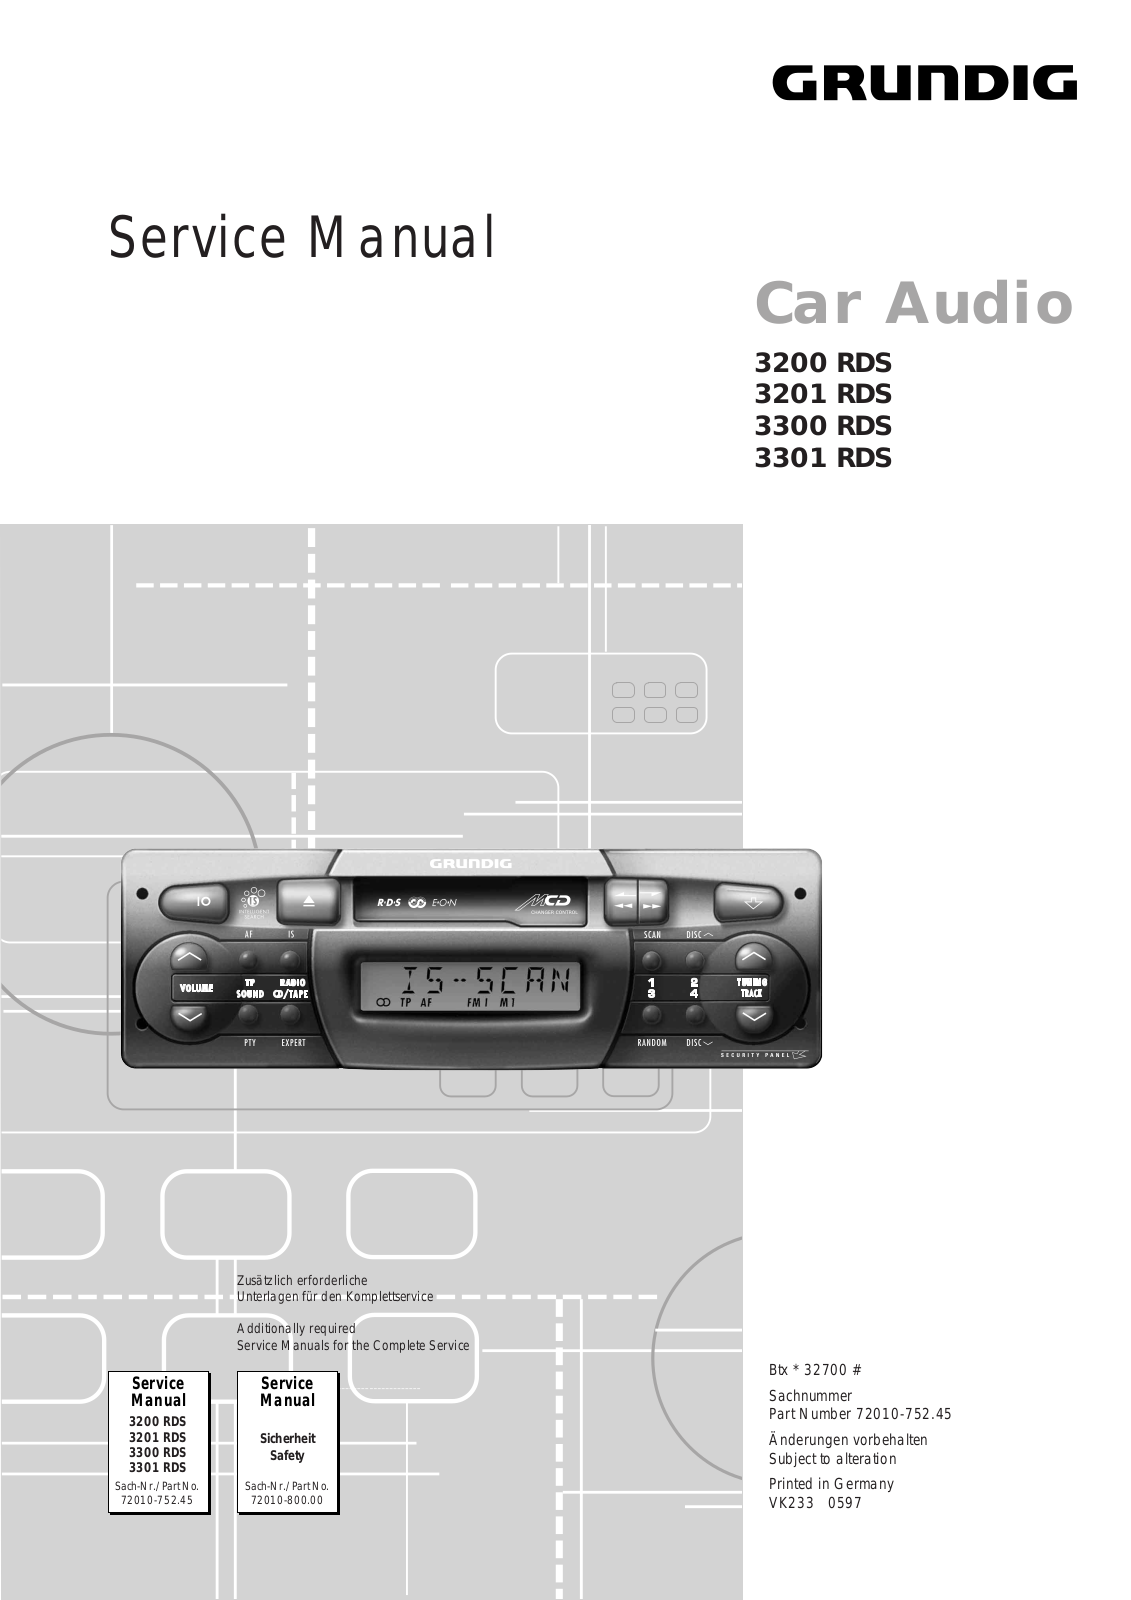 Grundig 3301-RDS, 3300-RDS, 3201-RDS, 3200-RDS Service Manual